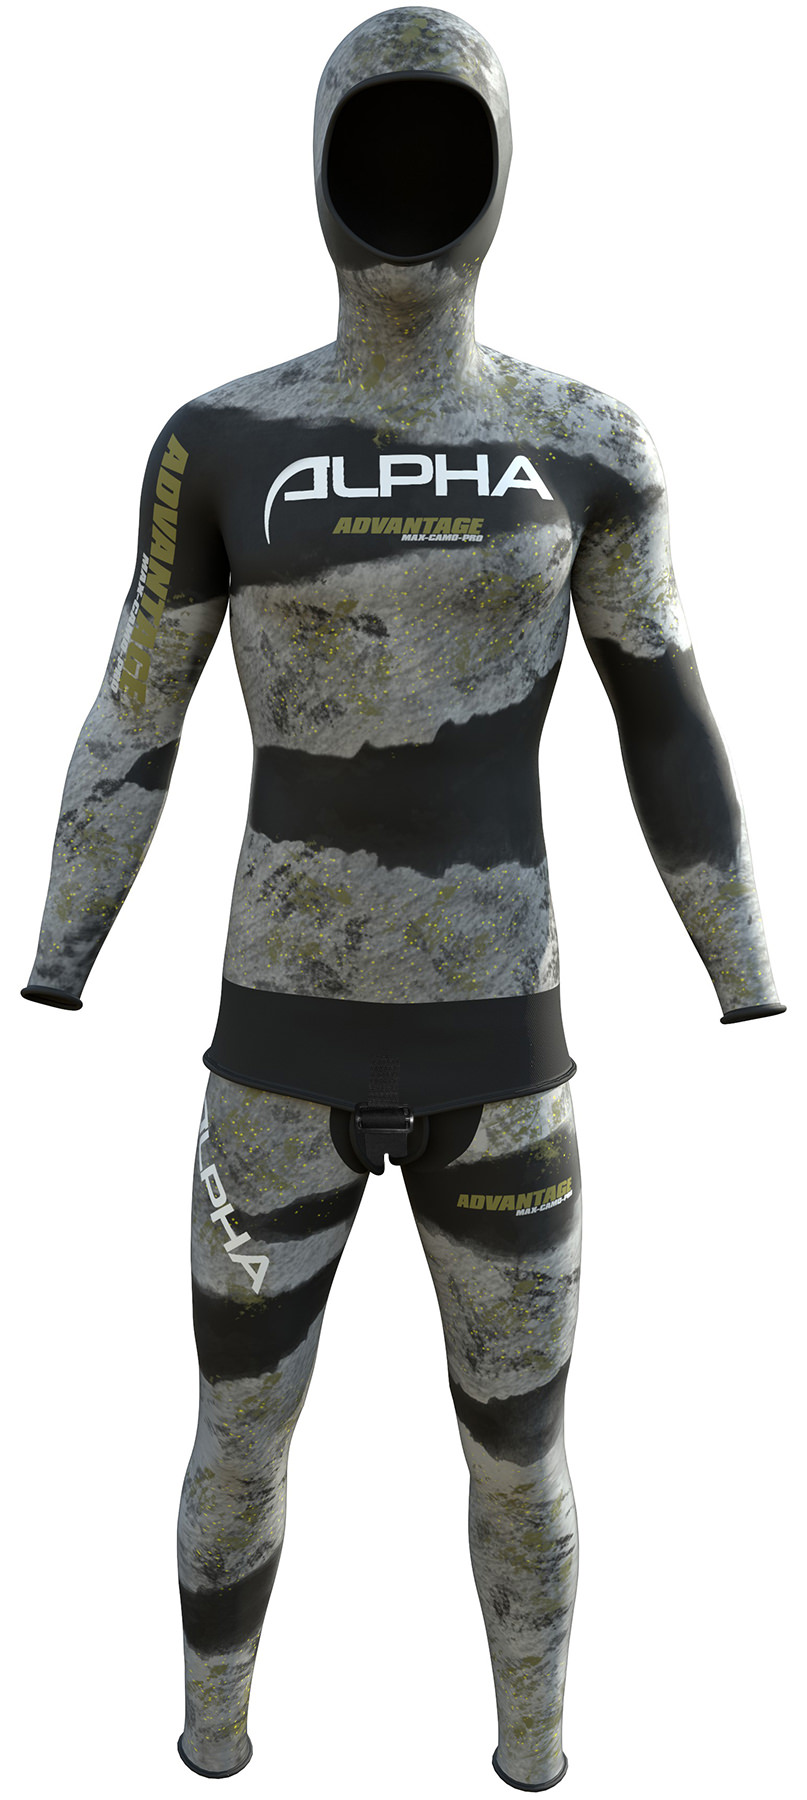 https://www.alphawetsuits.com/wp-content/uploads/2017/05/spearfishing-wetsuits-camouflage-advancedpro.jpg